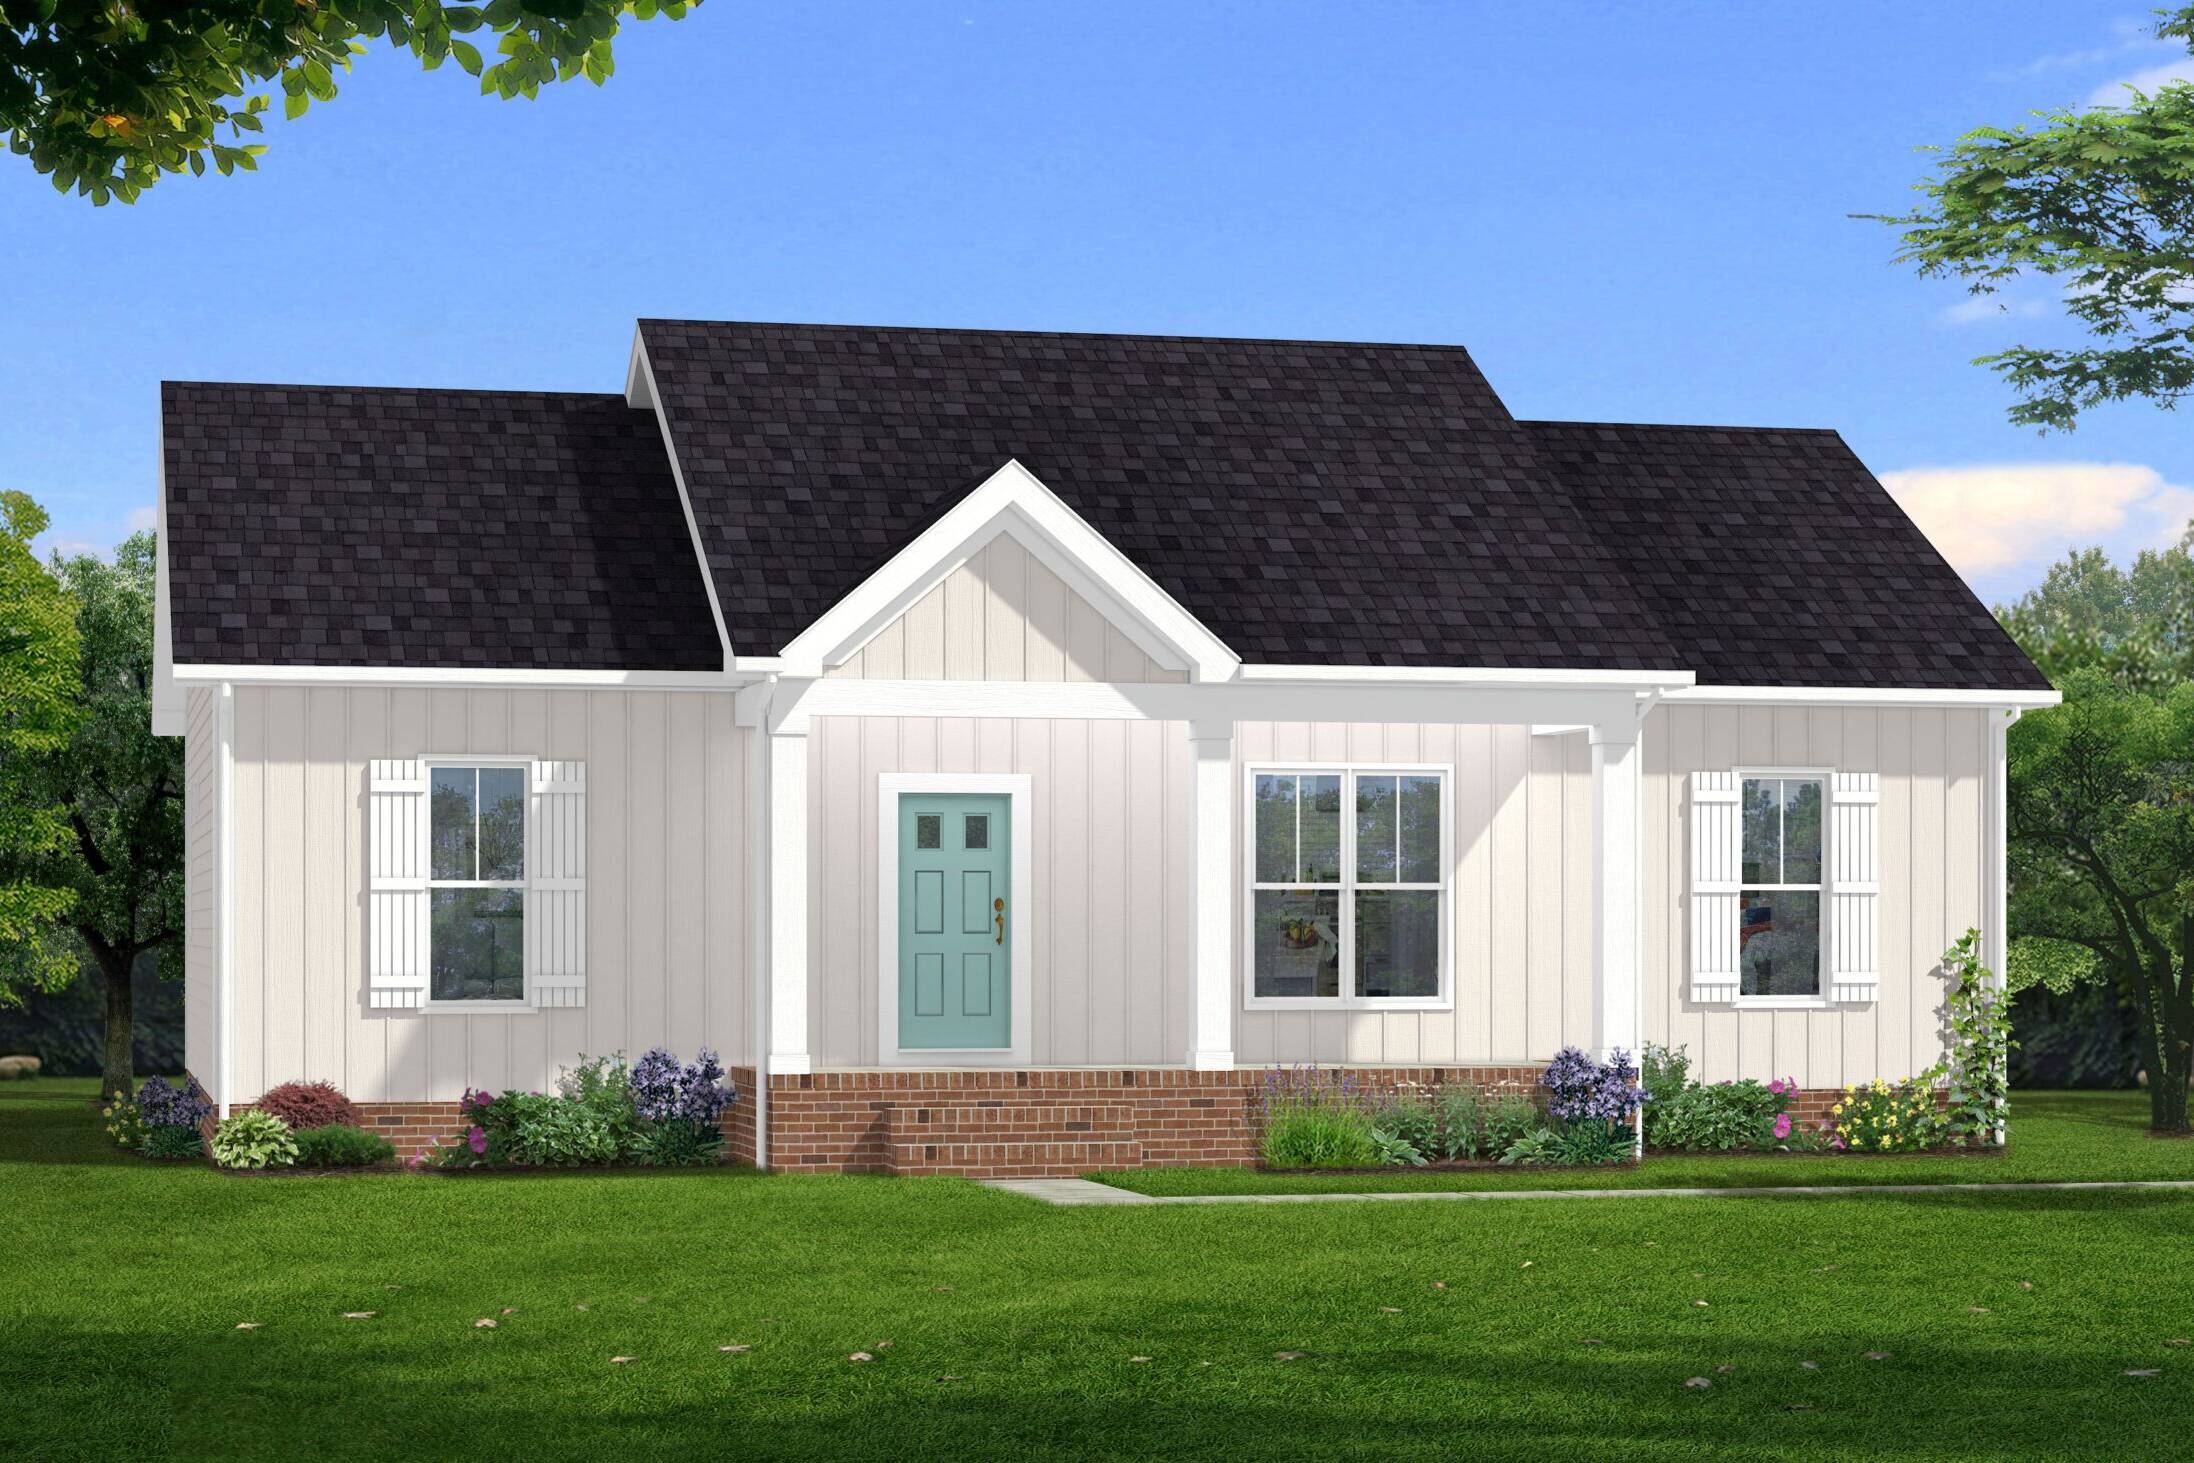 Exterior Rendering Pine Hill Lot 6 7.7.23 Scaled Uai 2194x1463, Rock River Homes